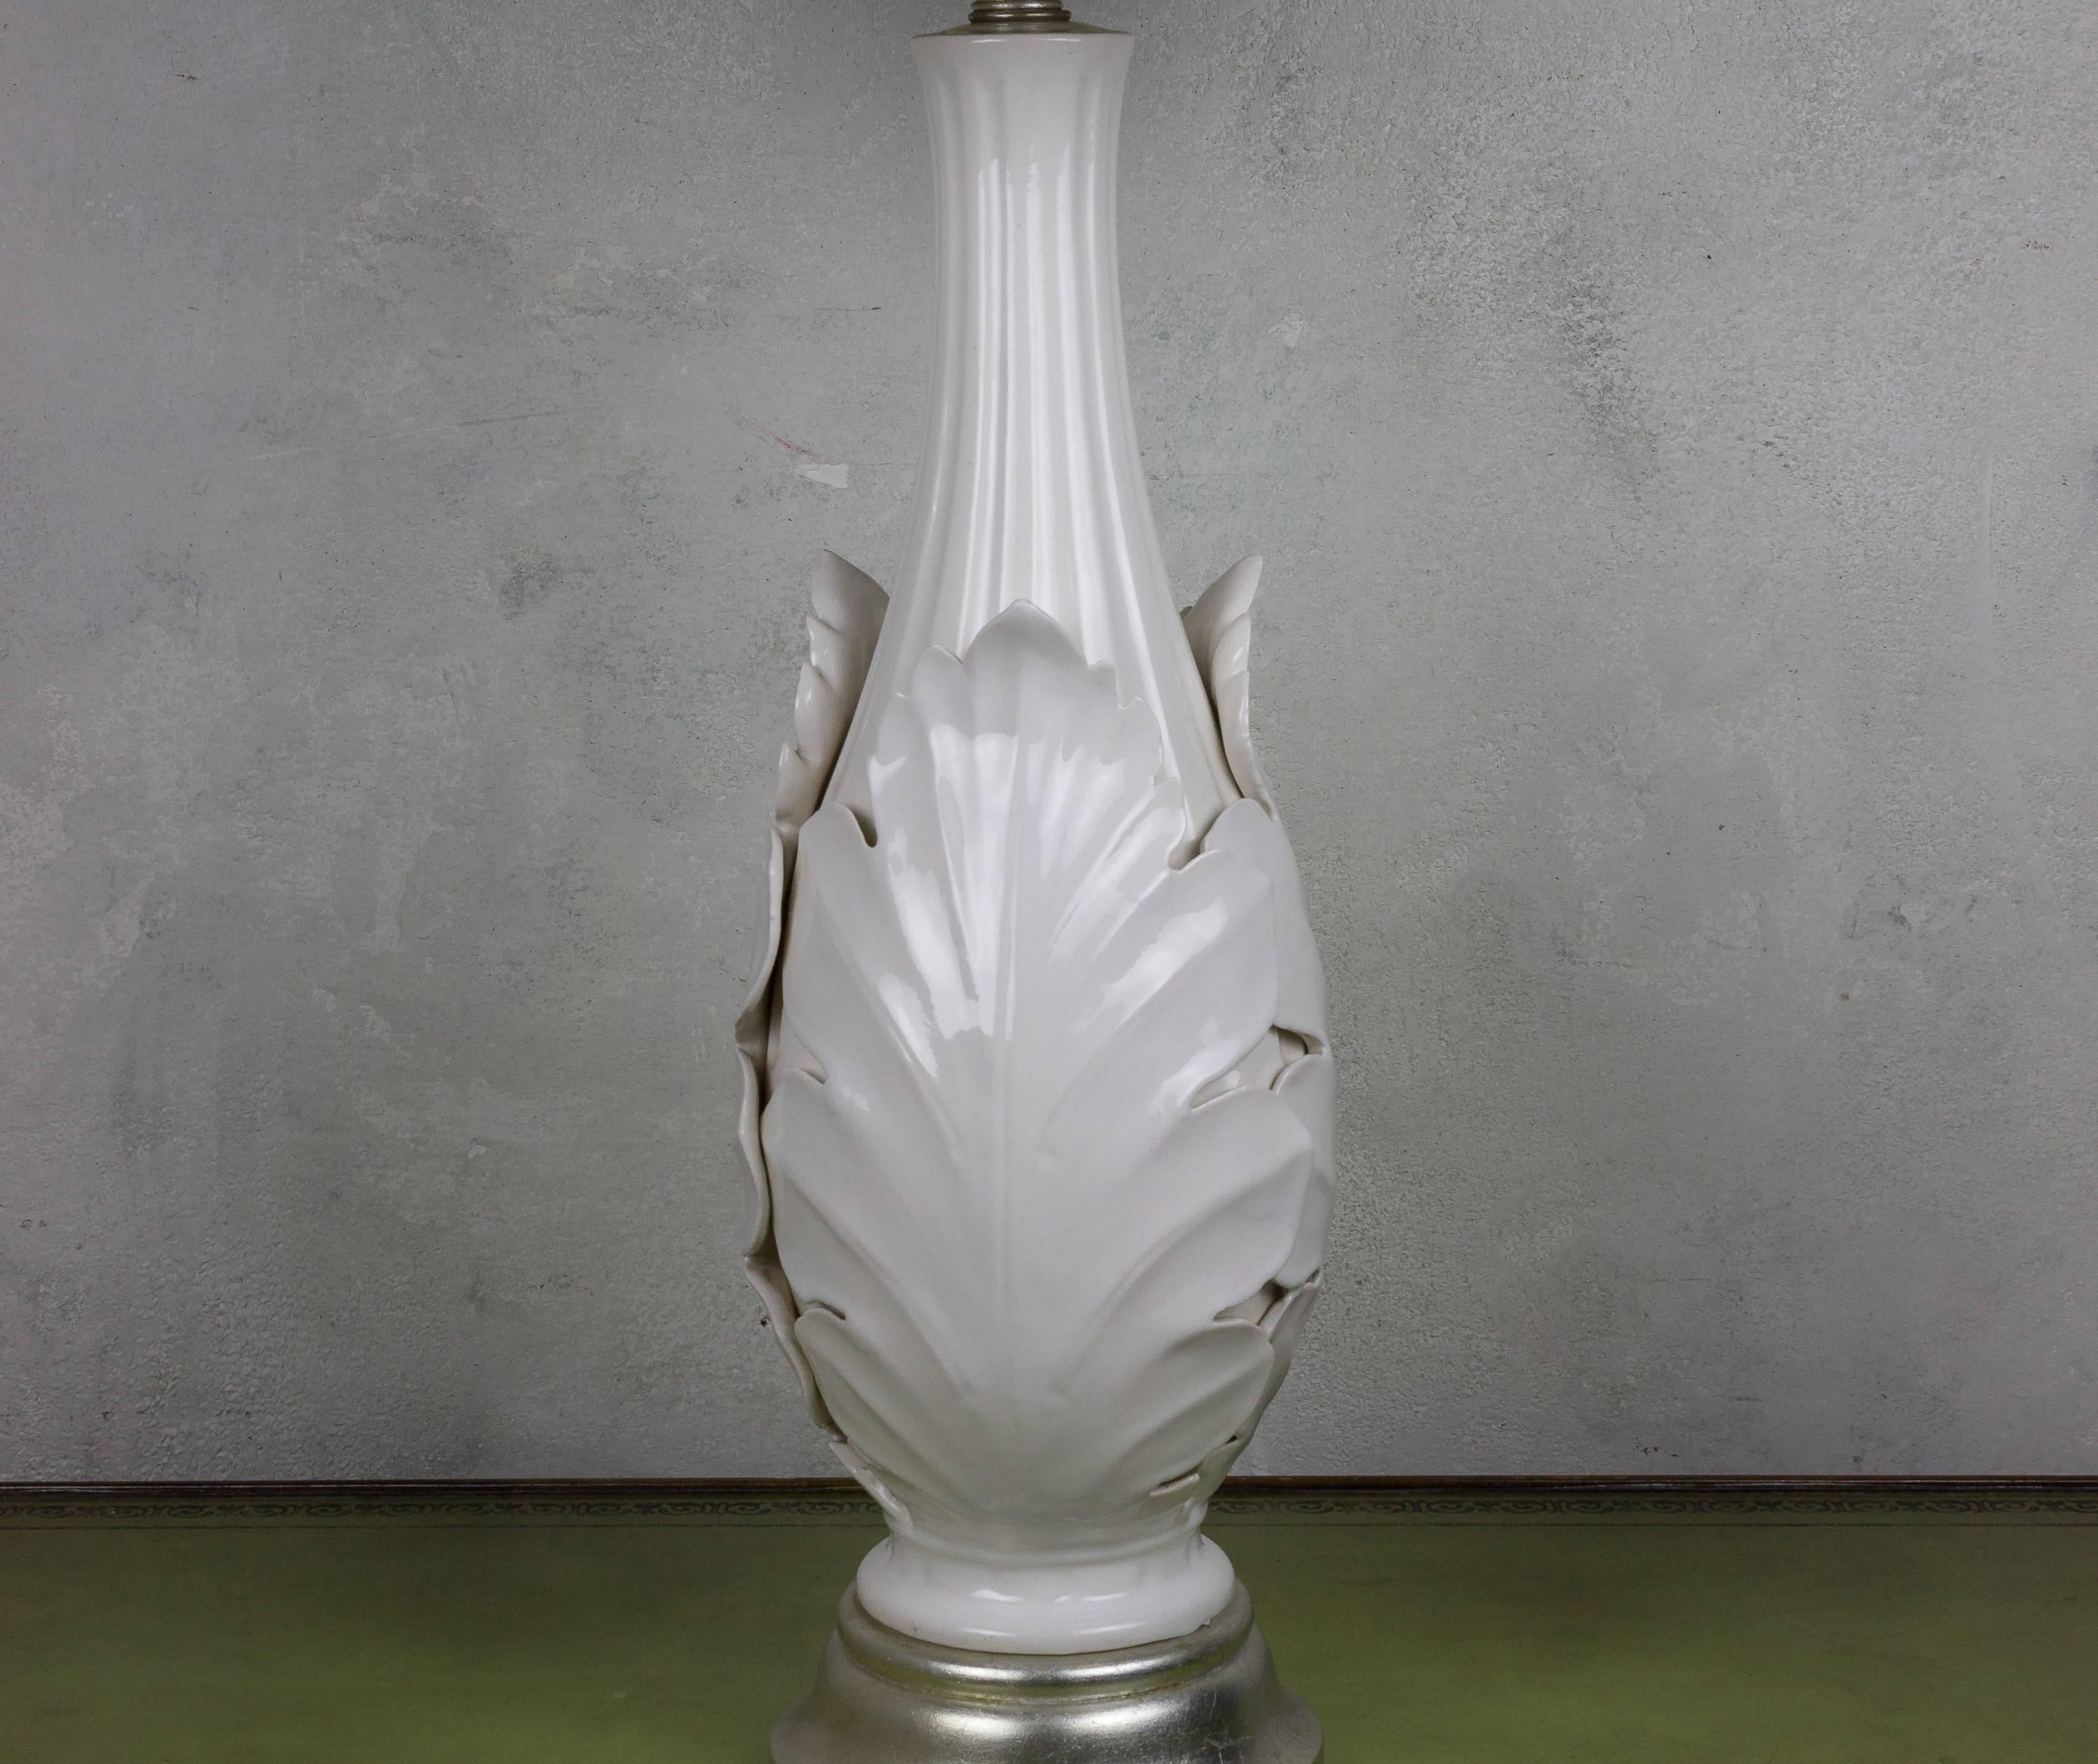 This elegant American 1940s white ceramic lamp embodies timeless sophistication. It features graceful stylized leaves, delicately encasing the stem, evoking a sense of natural beauty. Resting on a painted silver wood base, this lamp possesses a